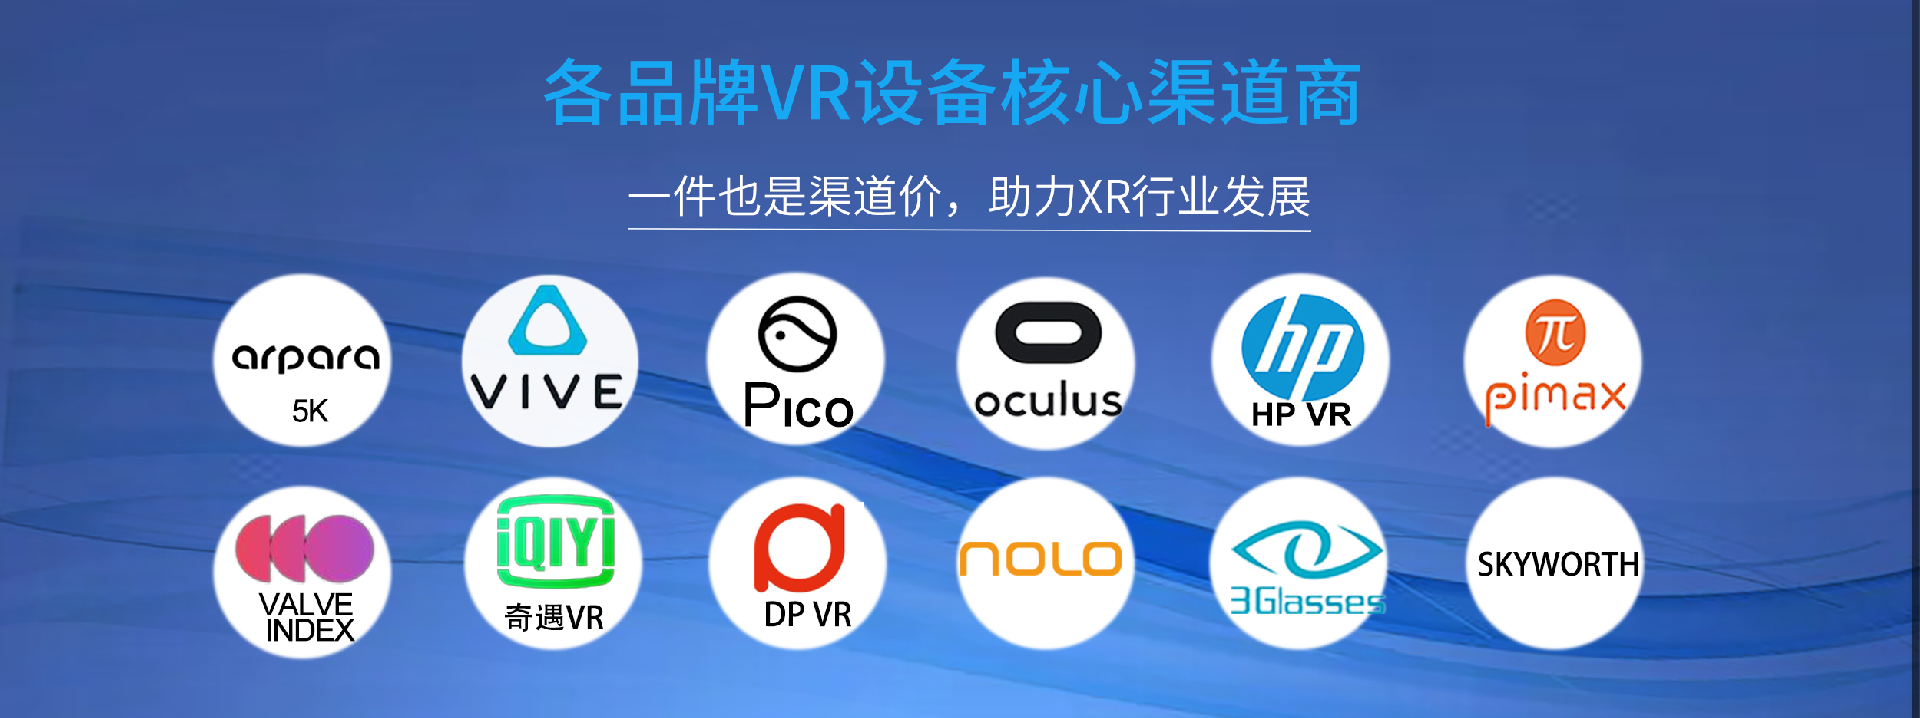 VR眼镜banner图2.png